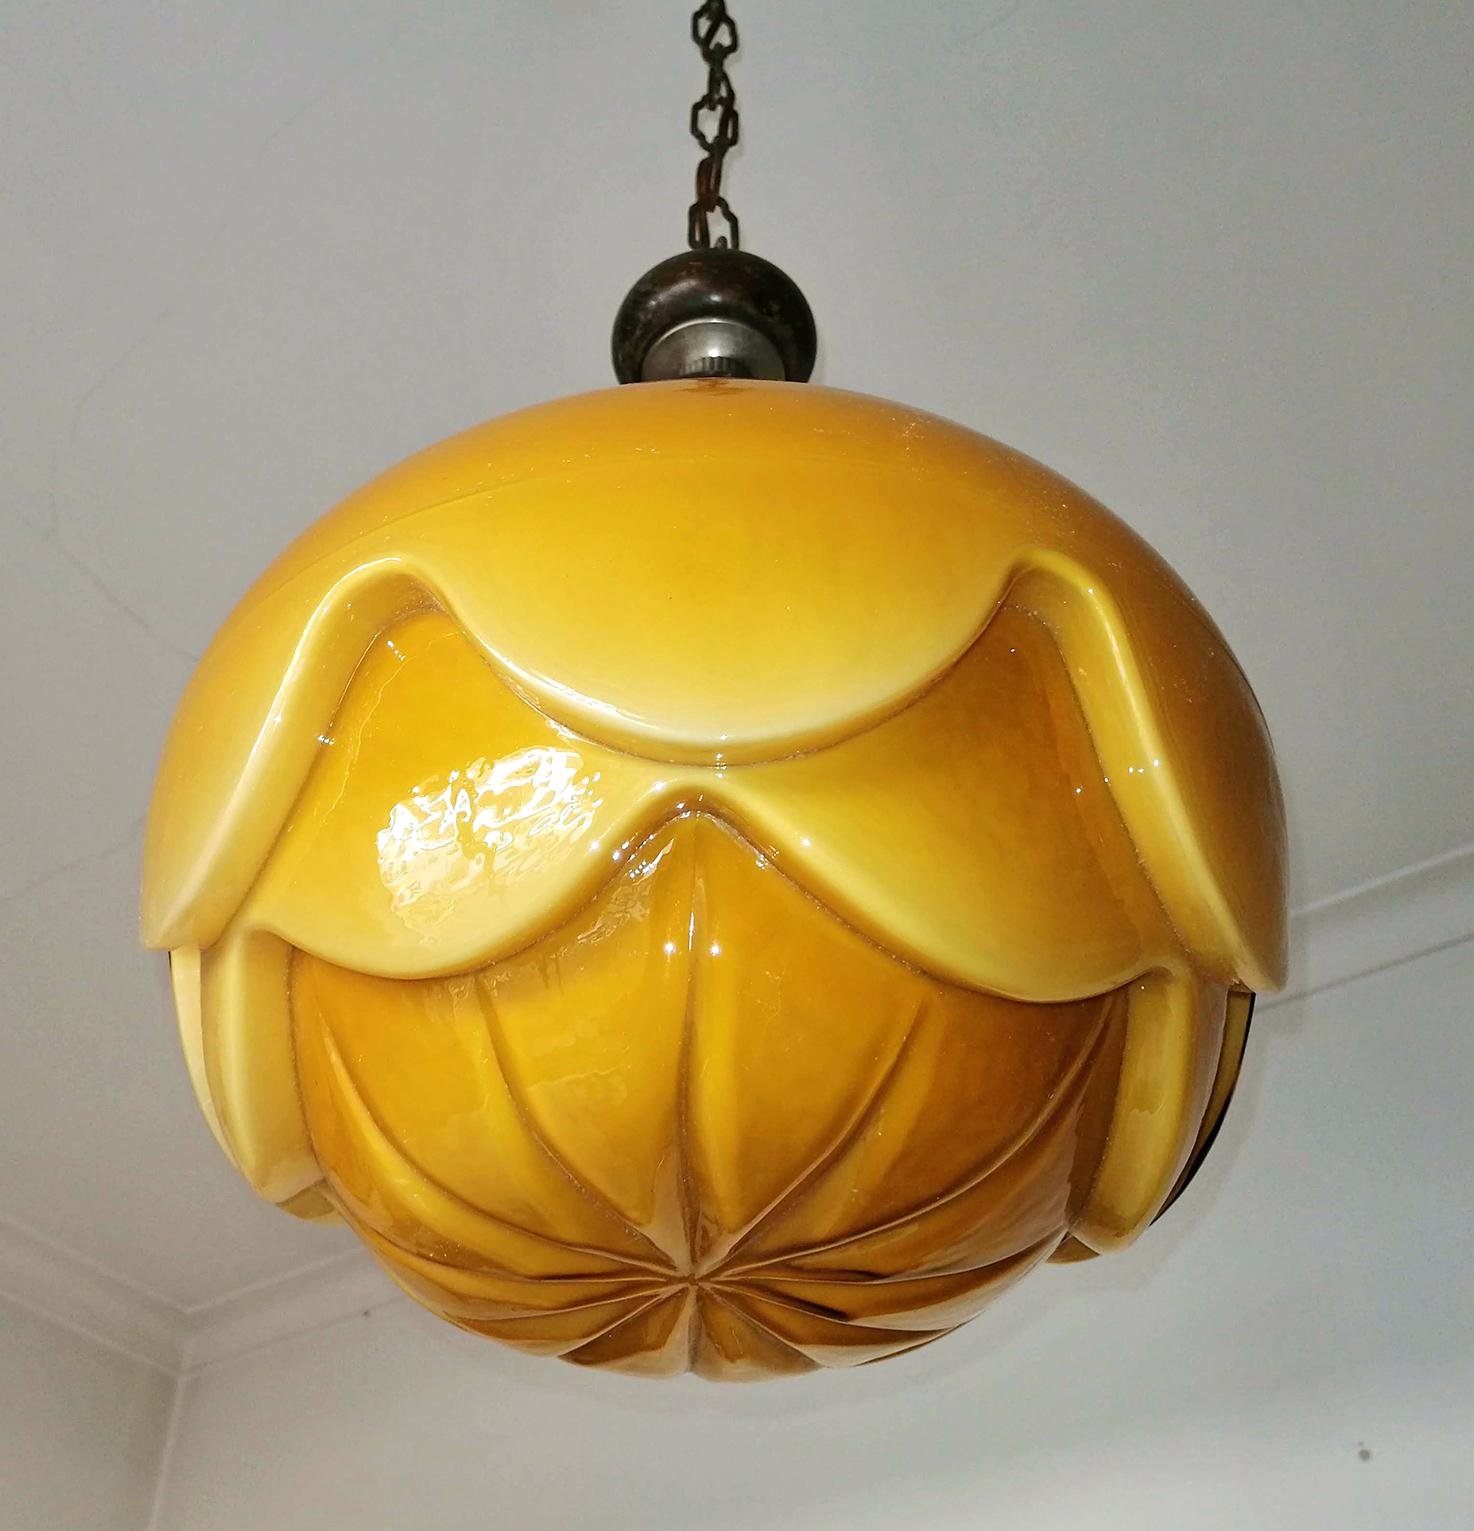 Fabulous Bauhaus French Art Deco with gorgeous opaline cased amber glass shade pendant chandelier, 1930.
Measures:
Diameter 11.8 in/ 30 cm
Height 39.3 in/ 100 cm (chain= 45 cm)
Weight: 15 lb/ 7 Kg
1 light bulbs E27/ good working